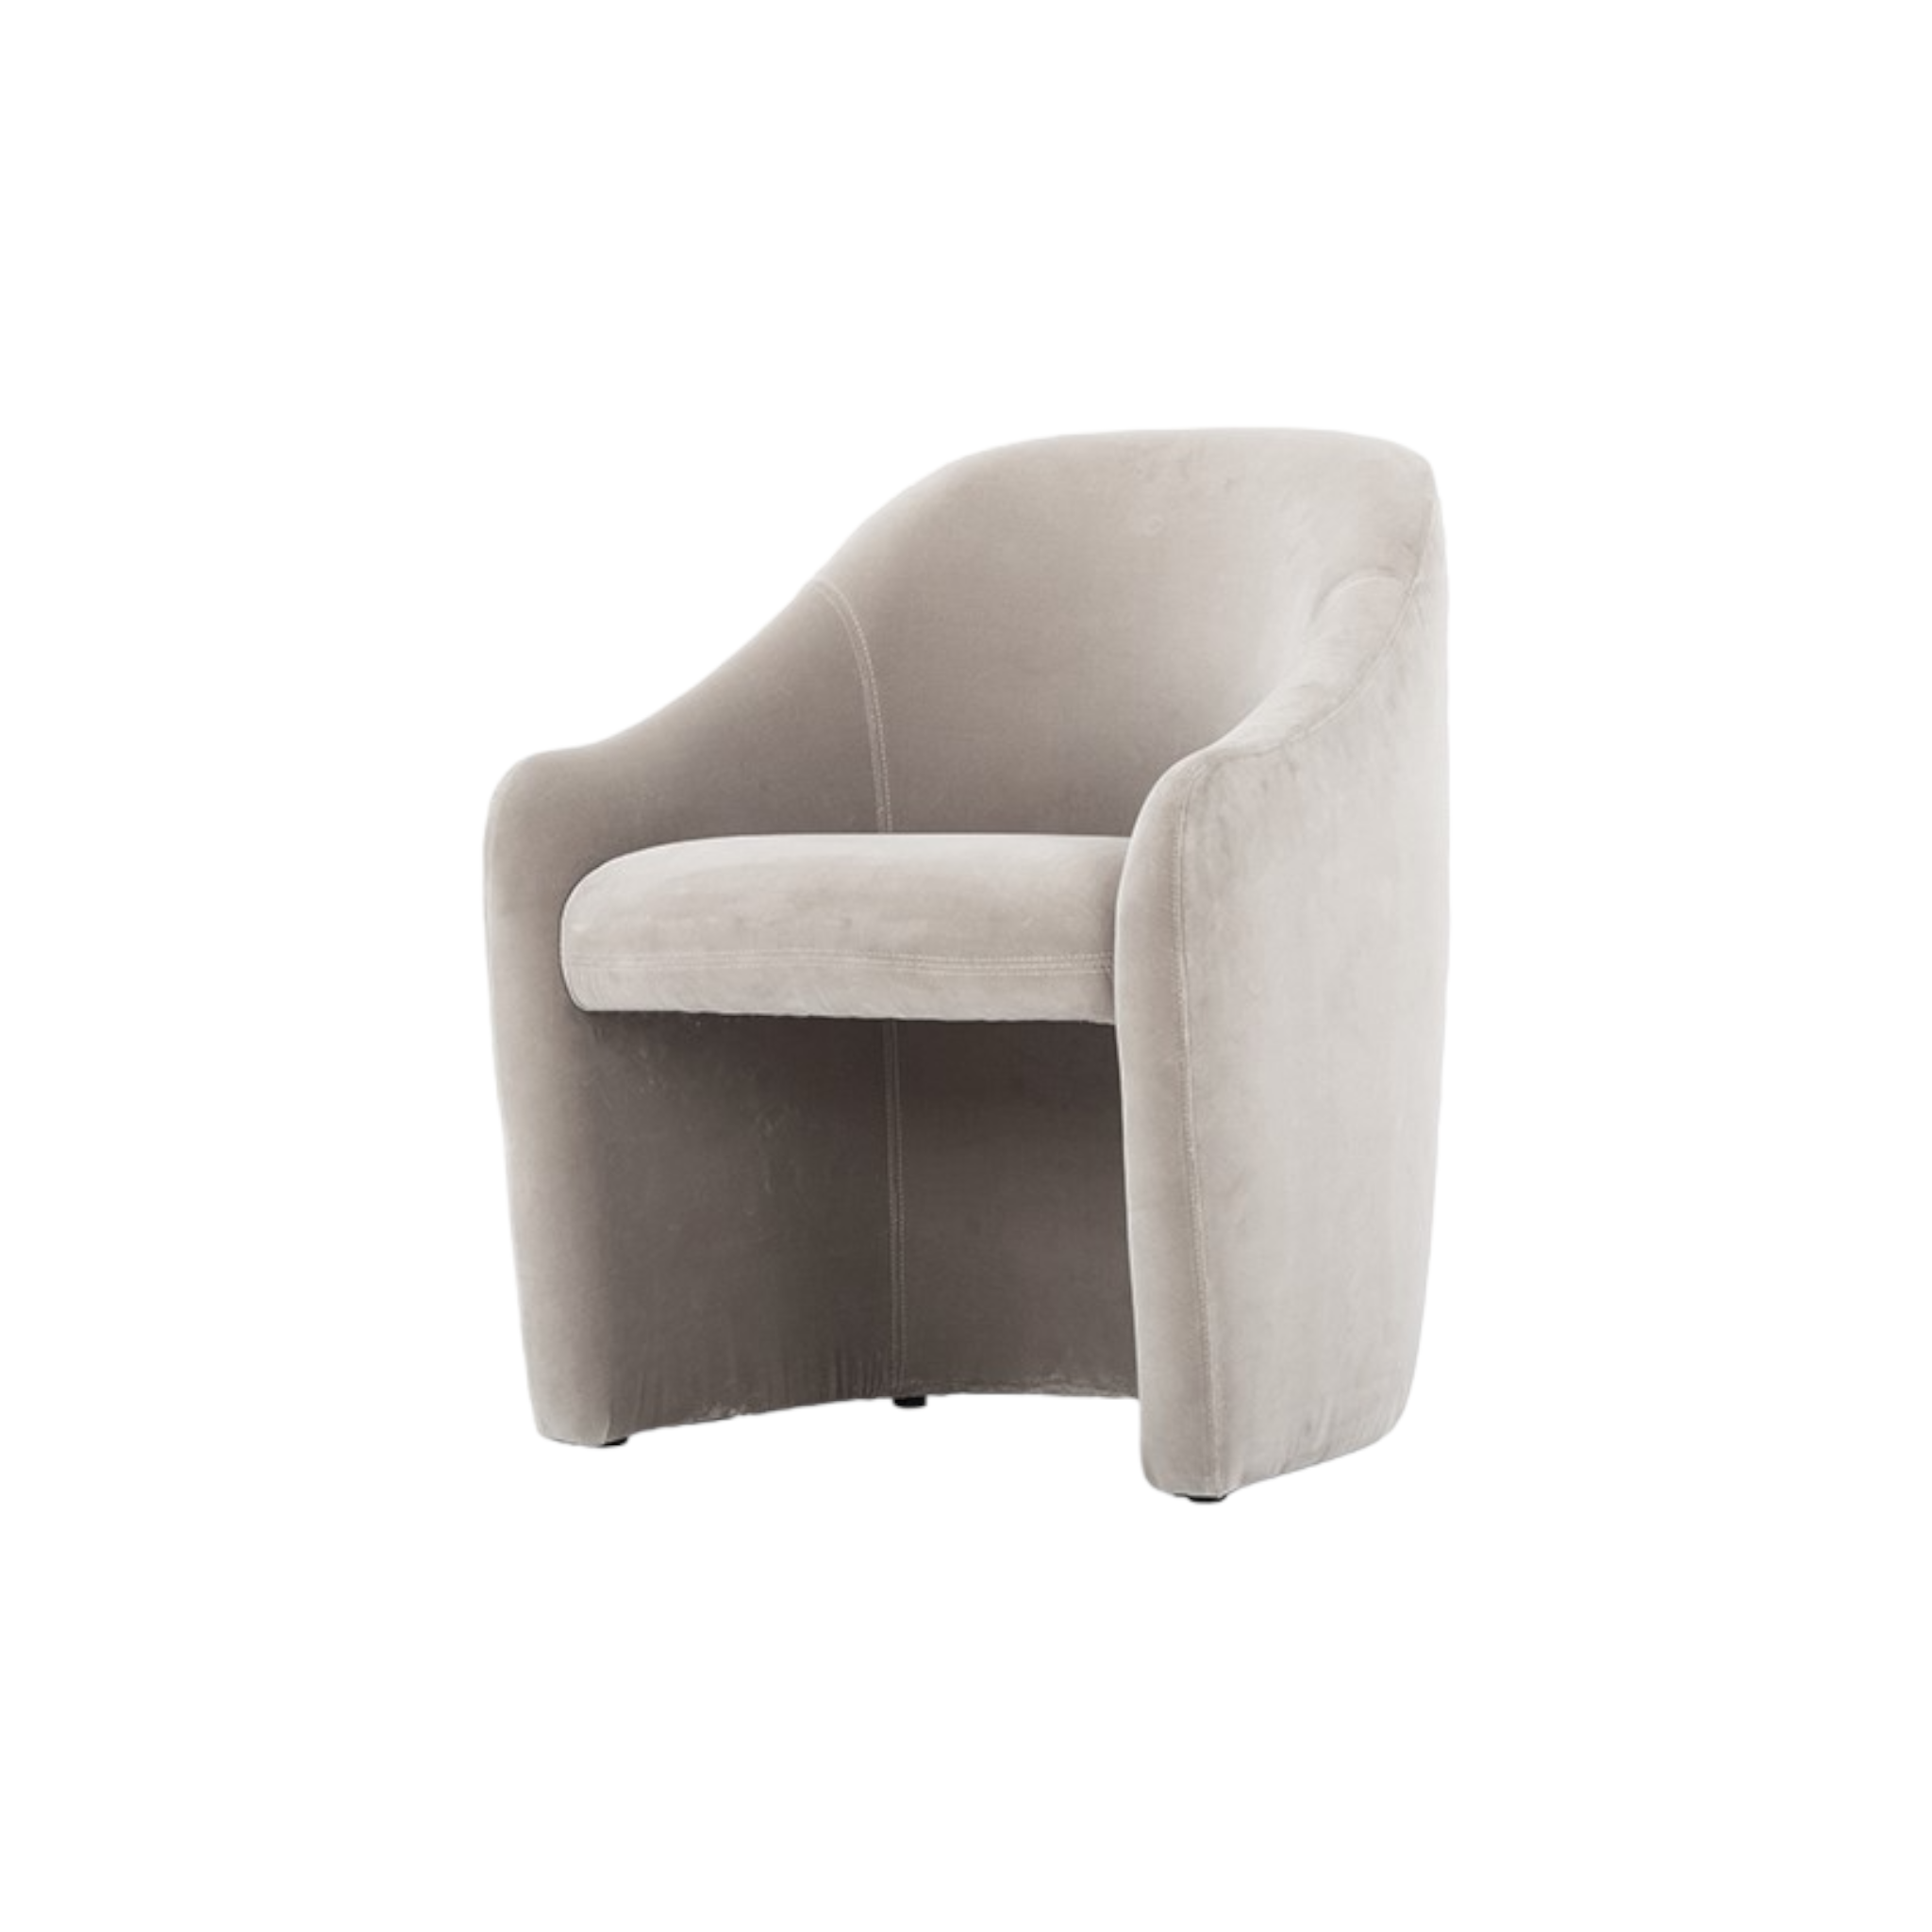 Bercy Grey Taupe Chair